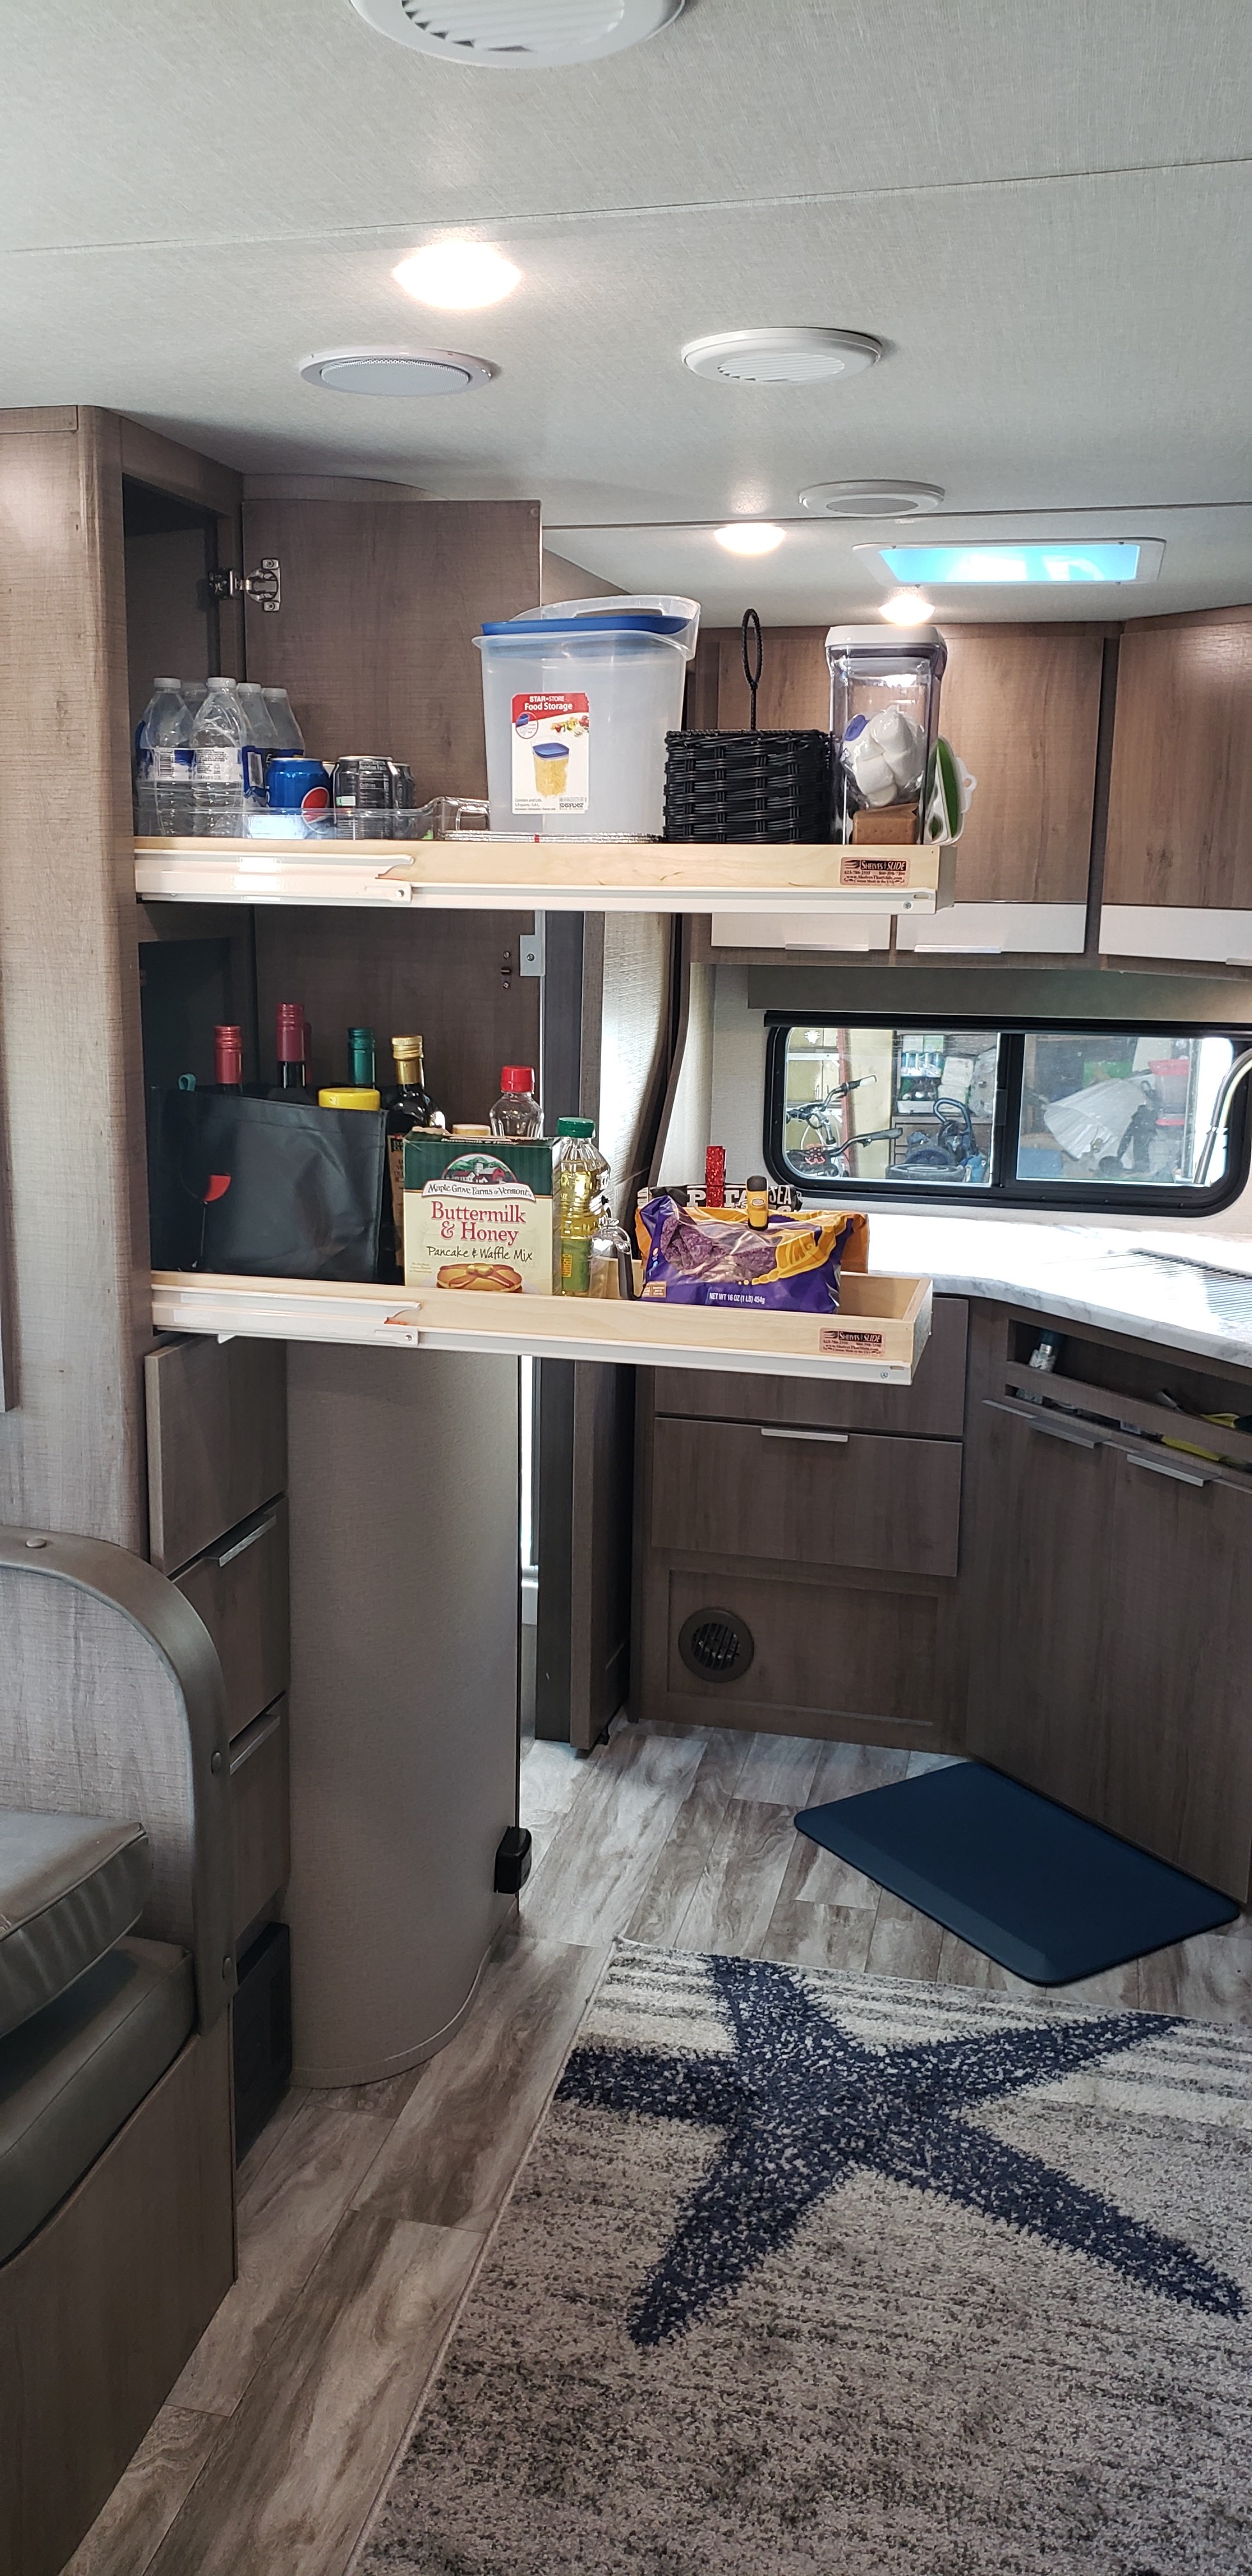 Pull Out Shelves Kitchen Organization - Bigger Than the Three of Us